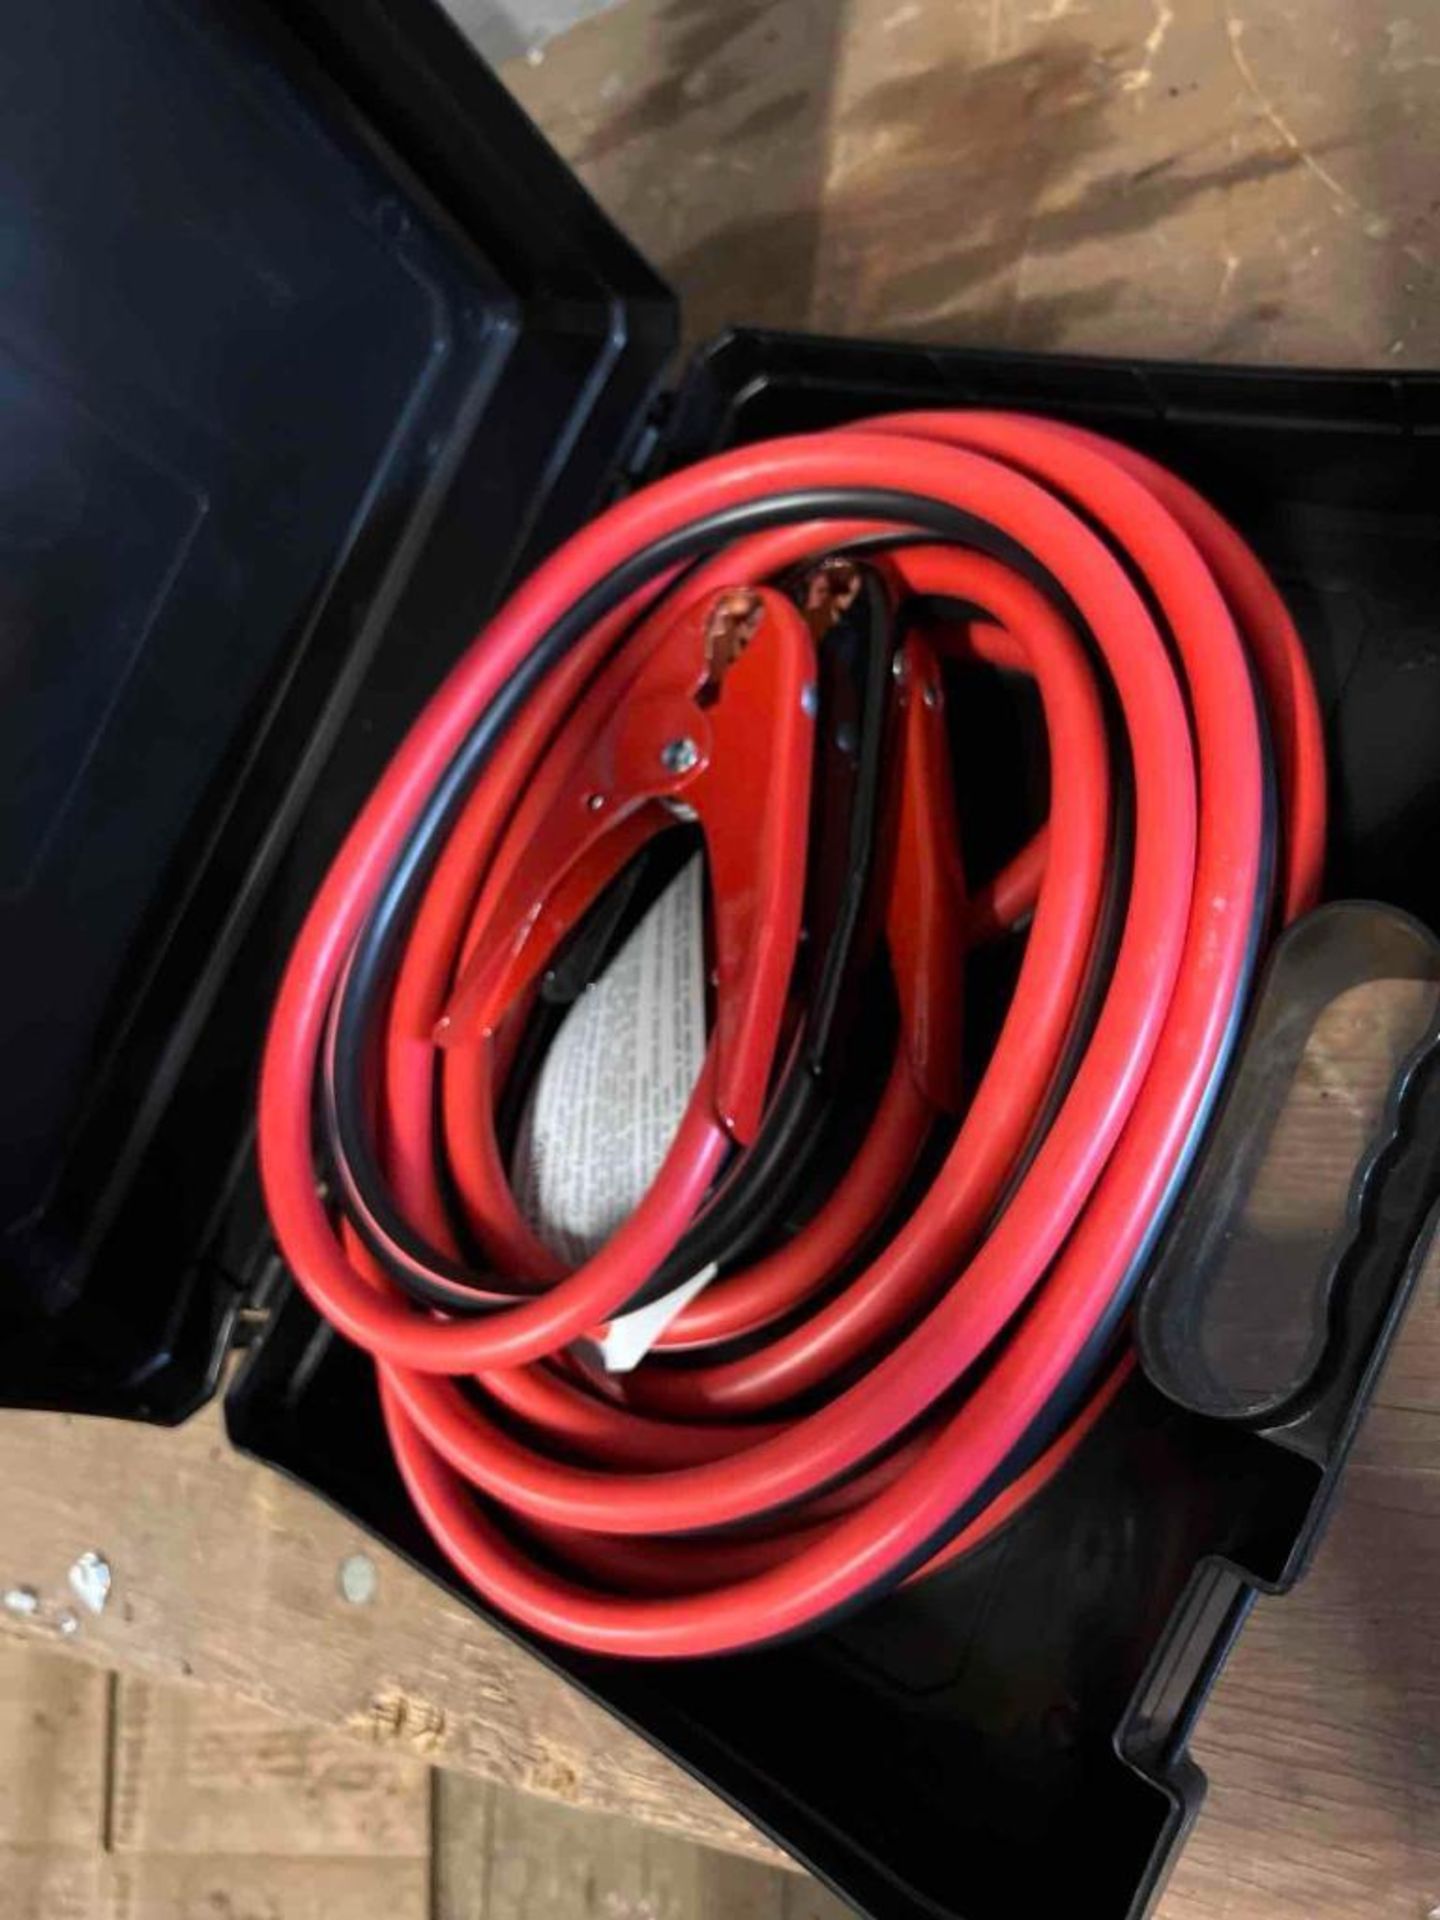 25 ft jumper cables - Image 2 of 4